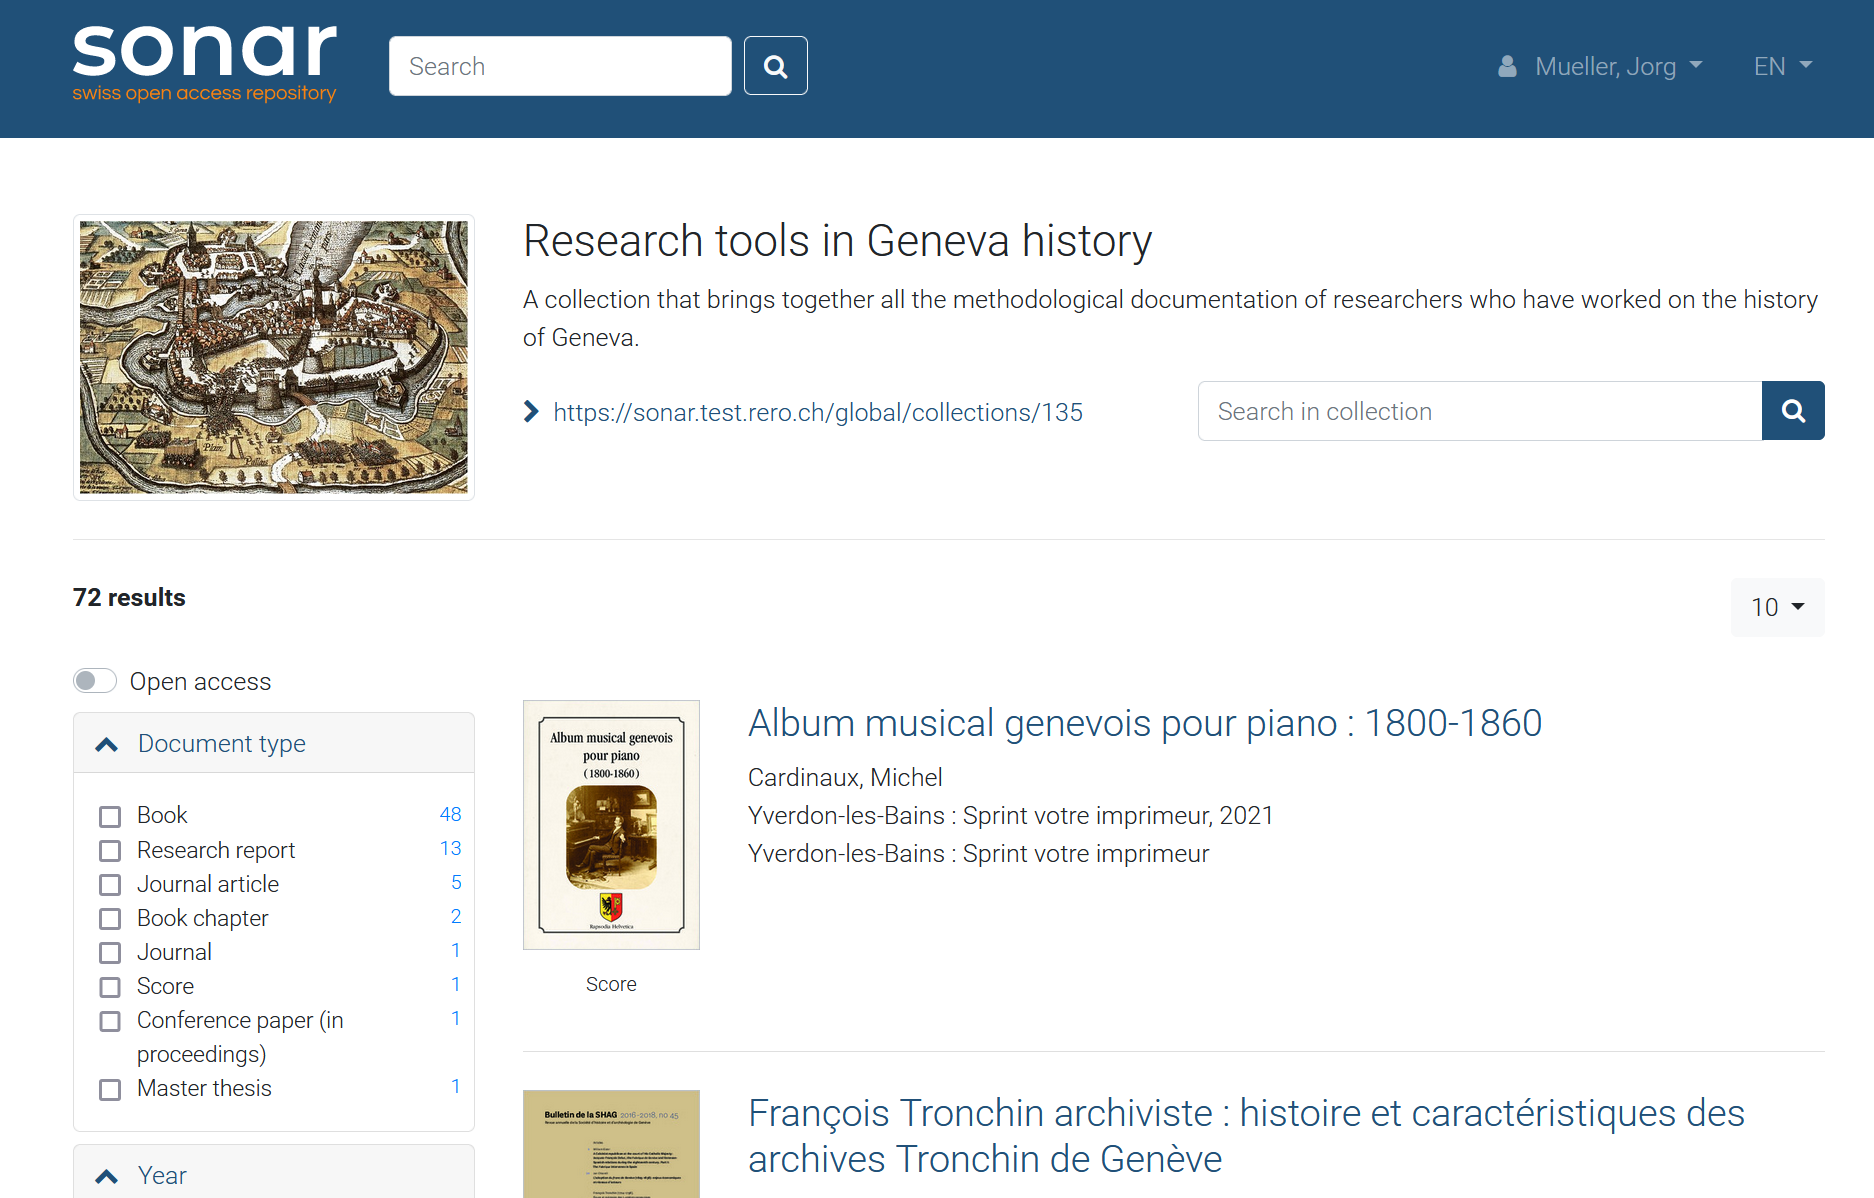 Screenshot of the collection 'Research tools in Geneva history'